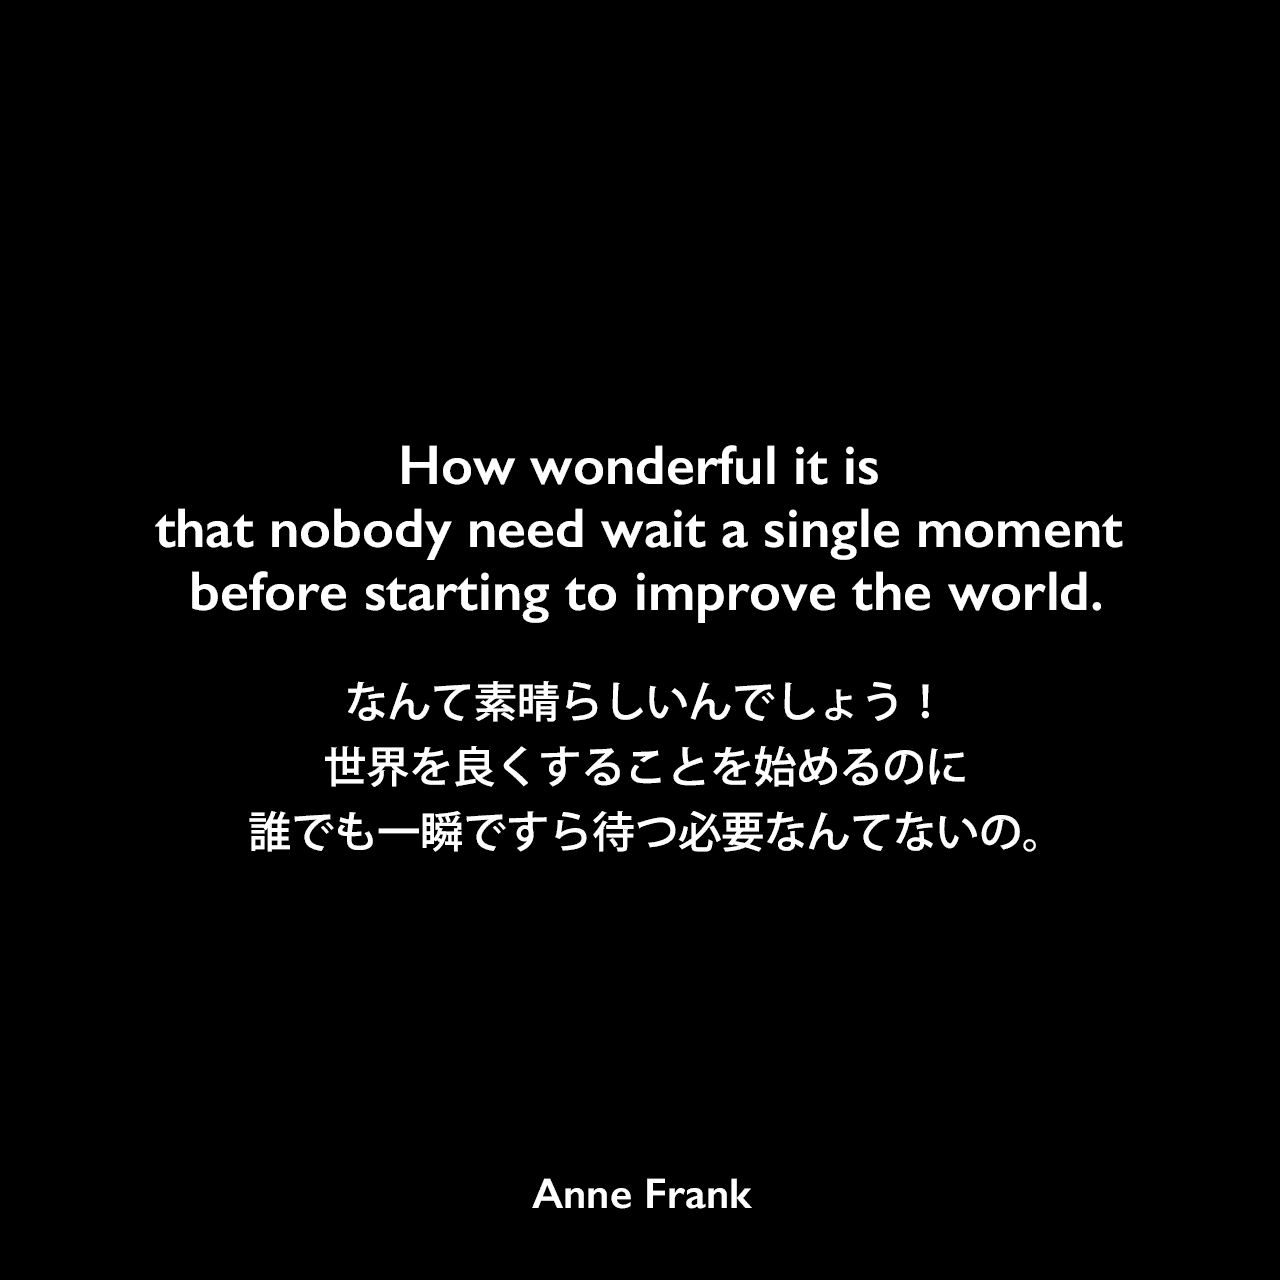 How wonderful it is that nobody need wait a single moment before starting to improve the world.なんて素晴らしいんでしょう！世界を良くすることを始めるのに誰でも一瞬ですら待つ必要なんてないの。Anne Frank